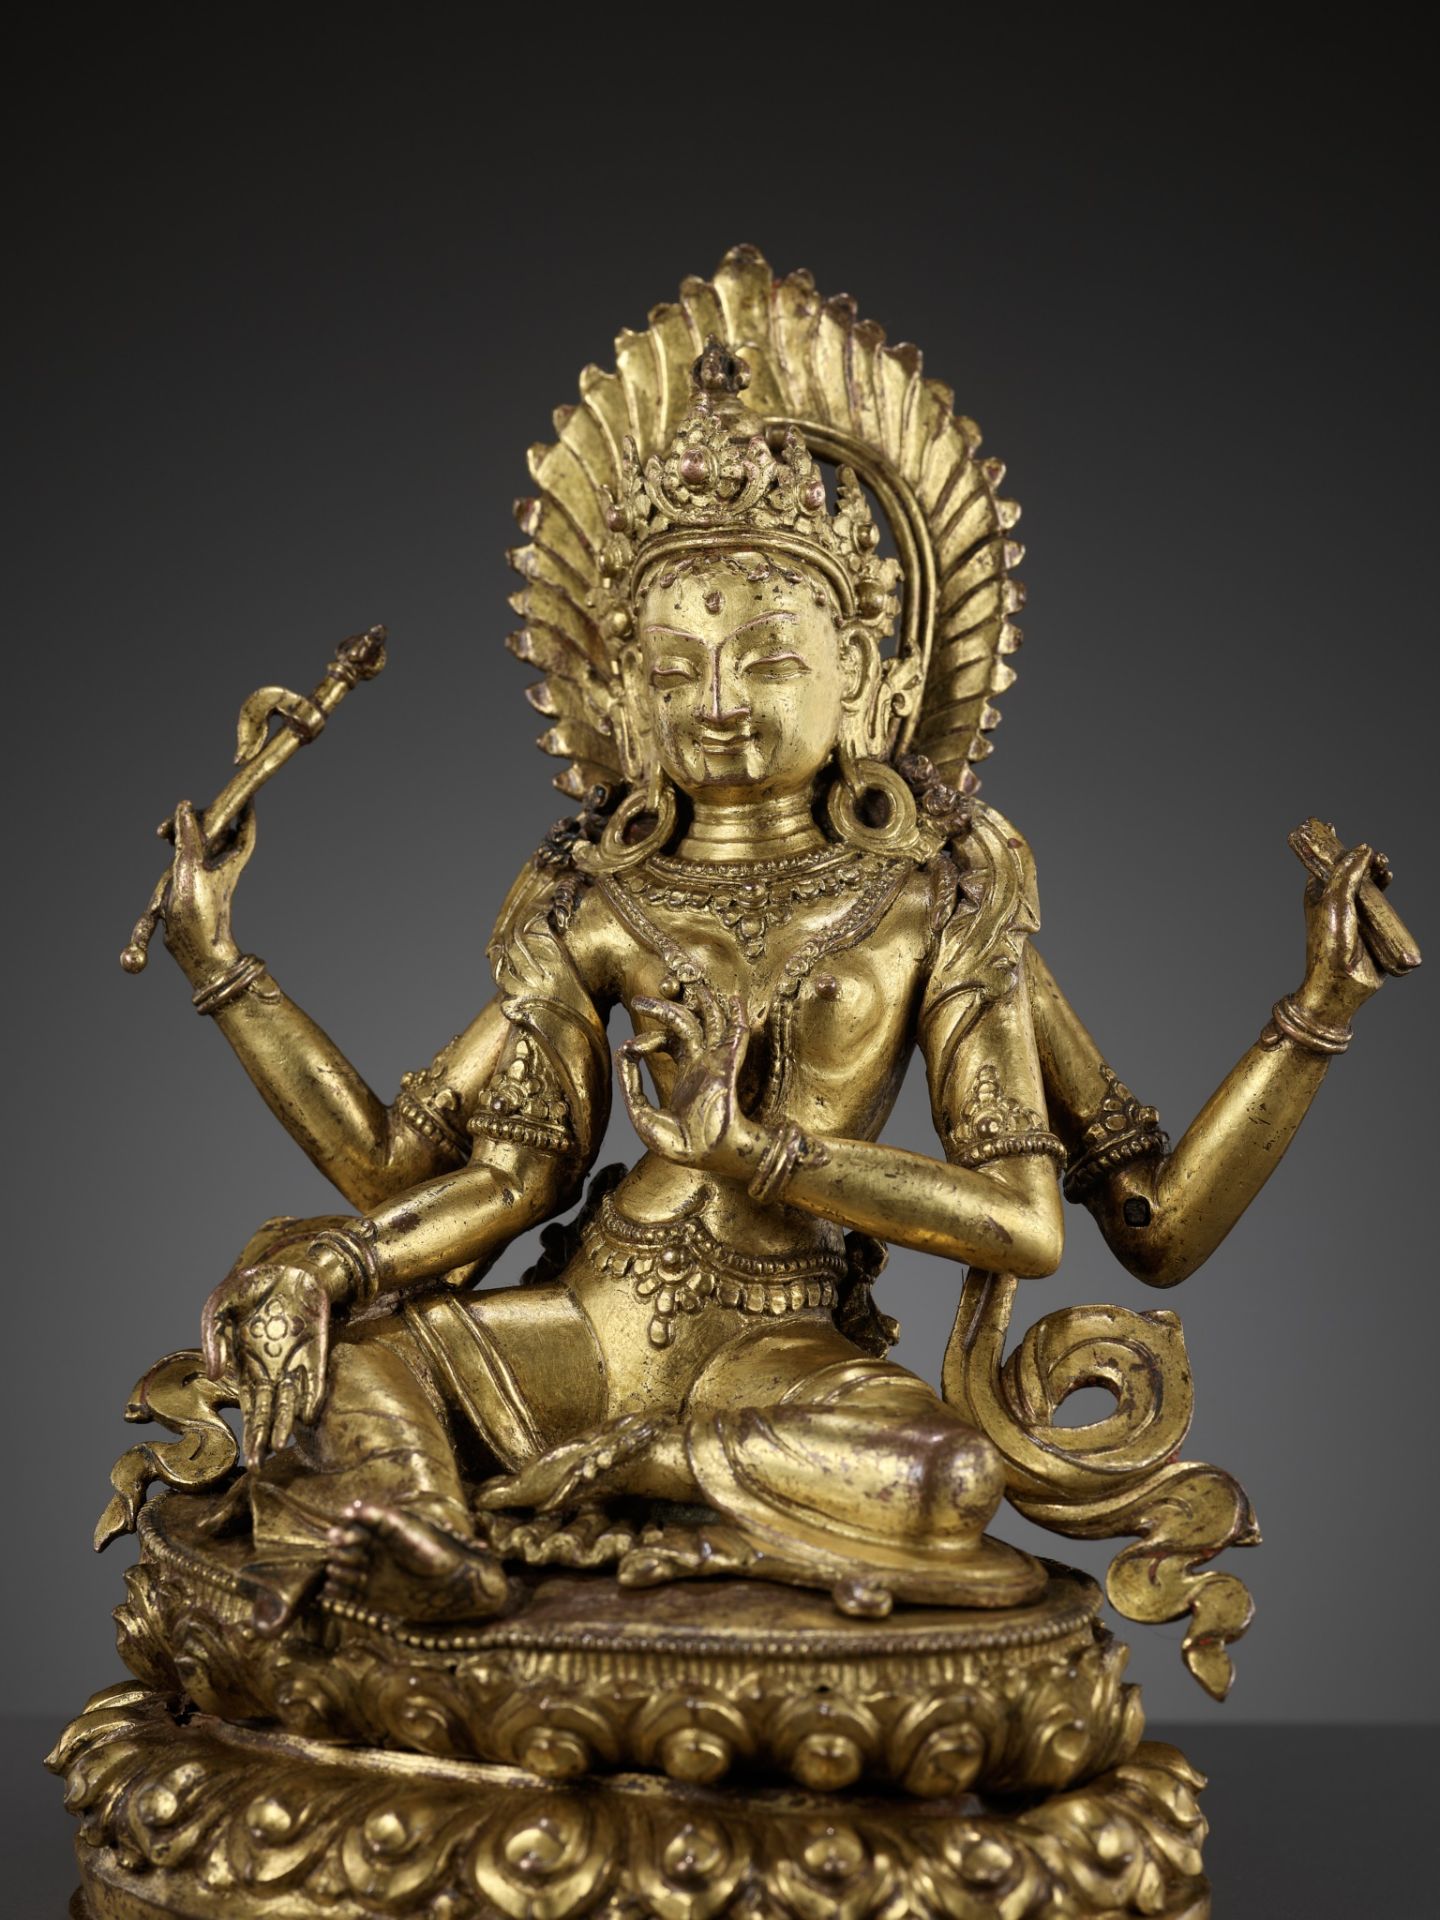 A CAST AND REPOUSSE GILT COPPER ALLOY FIGURE OF TARA, NEPAL, 18TH-19TH CENTURY